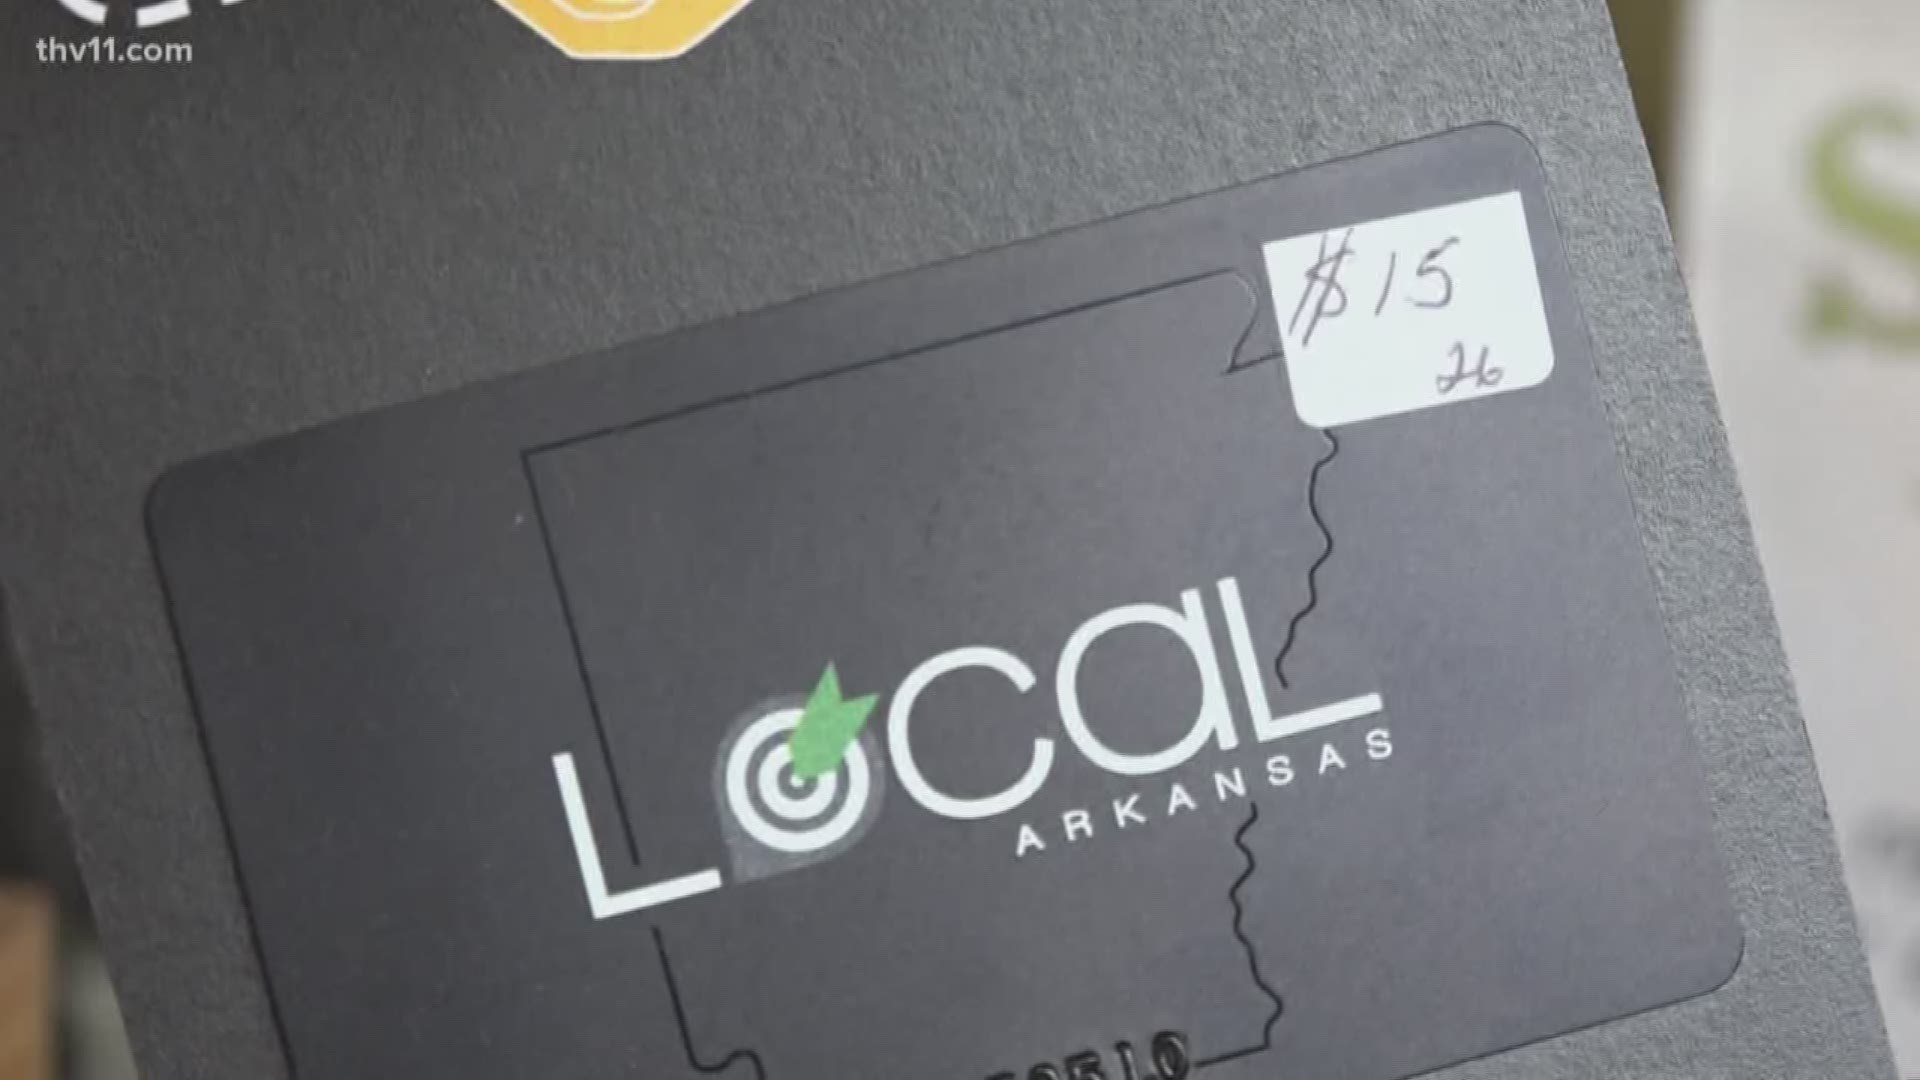 New card offers discounts for shopping local